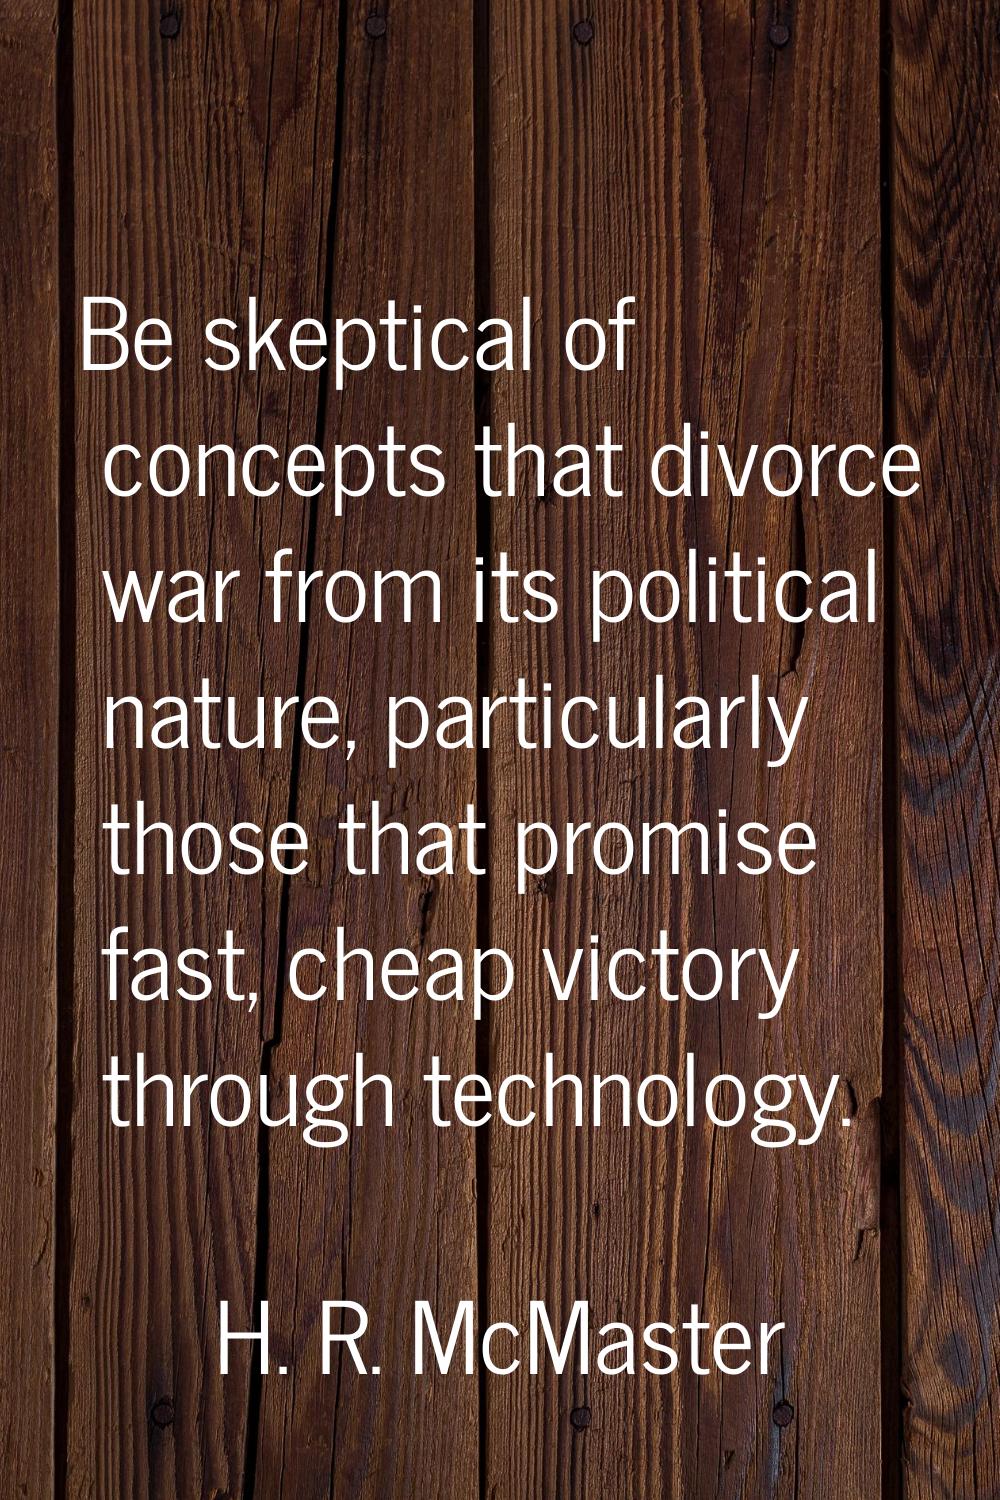 Be skeptical of concepts that divorce war from its political nature, particularly those that promis